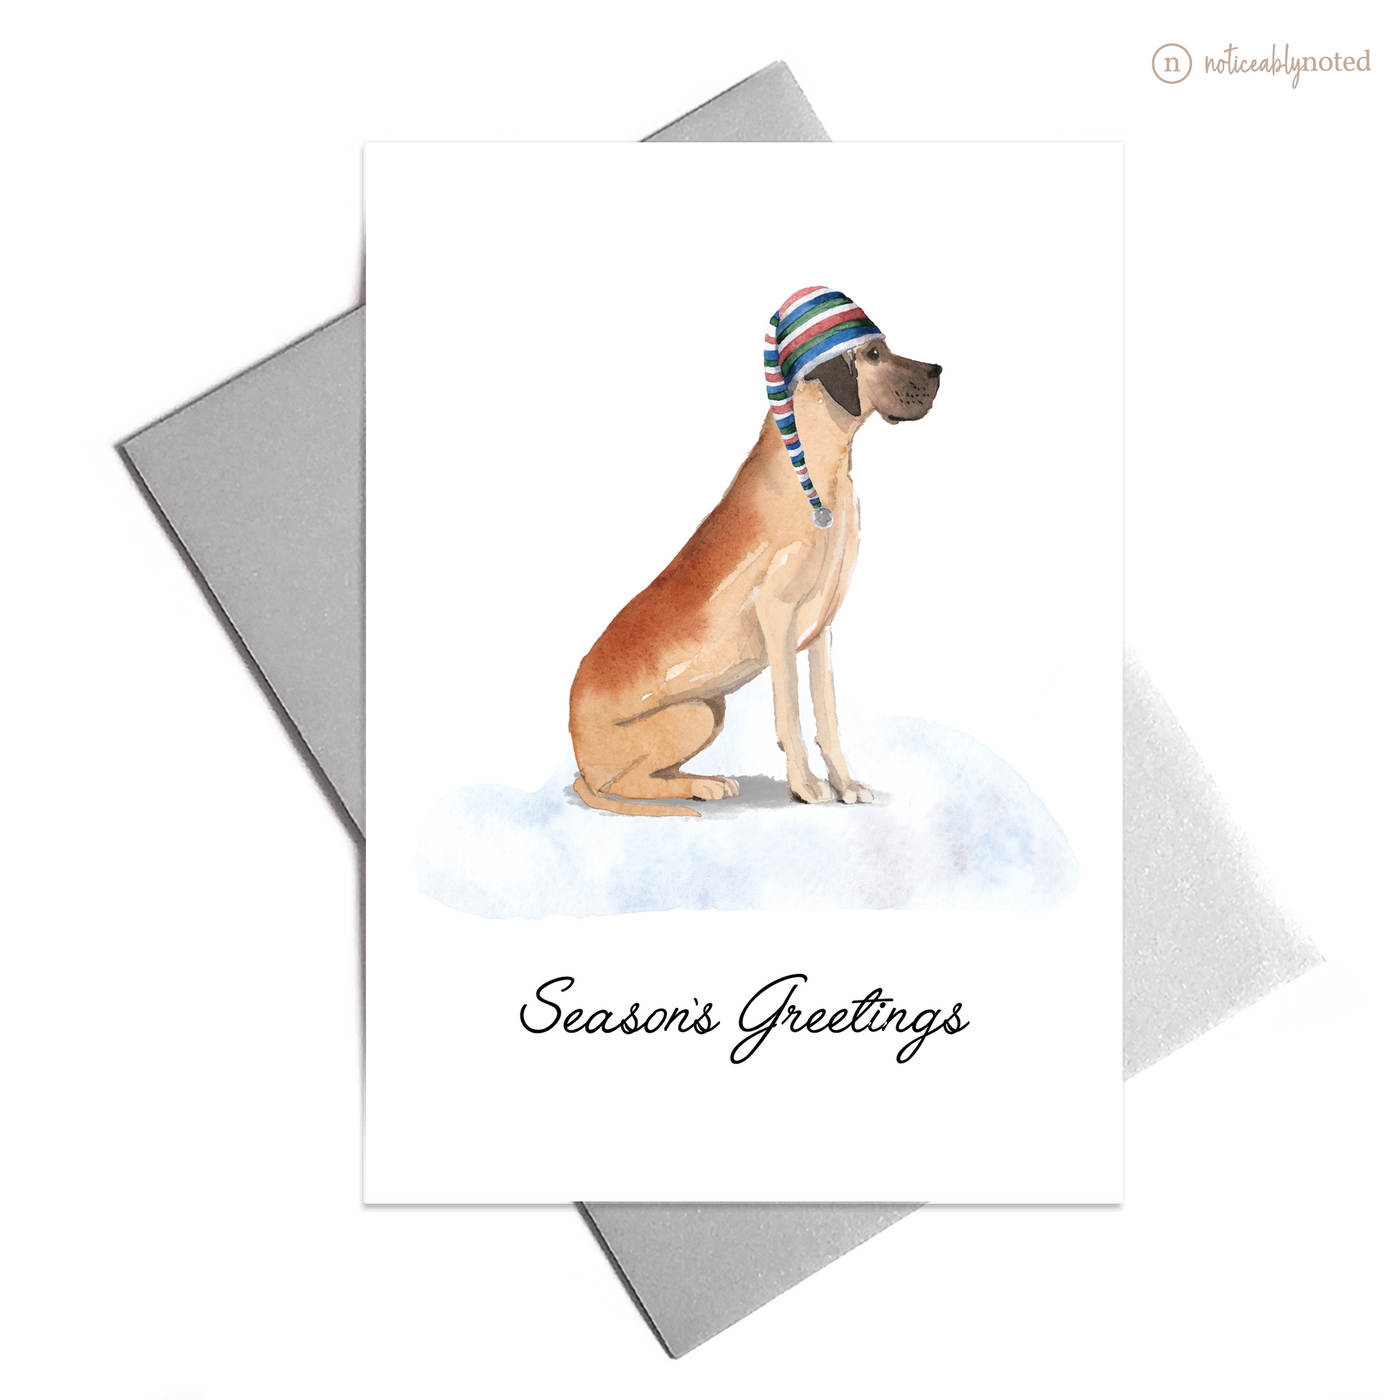 Great Dane Dog Holiday Card | Noticeably Noted